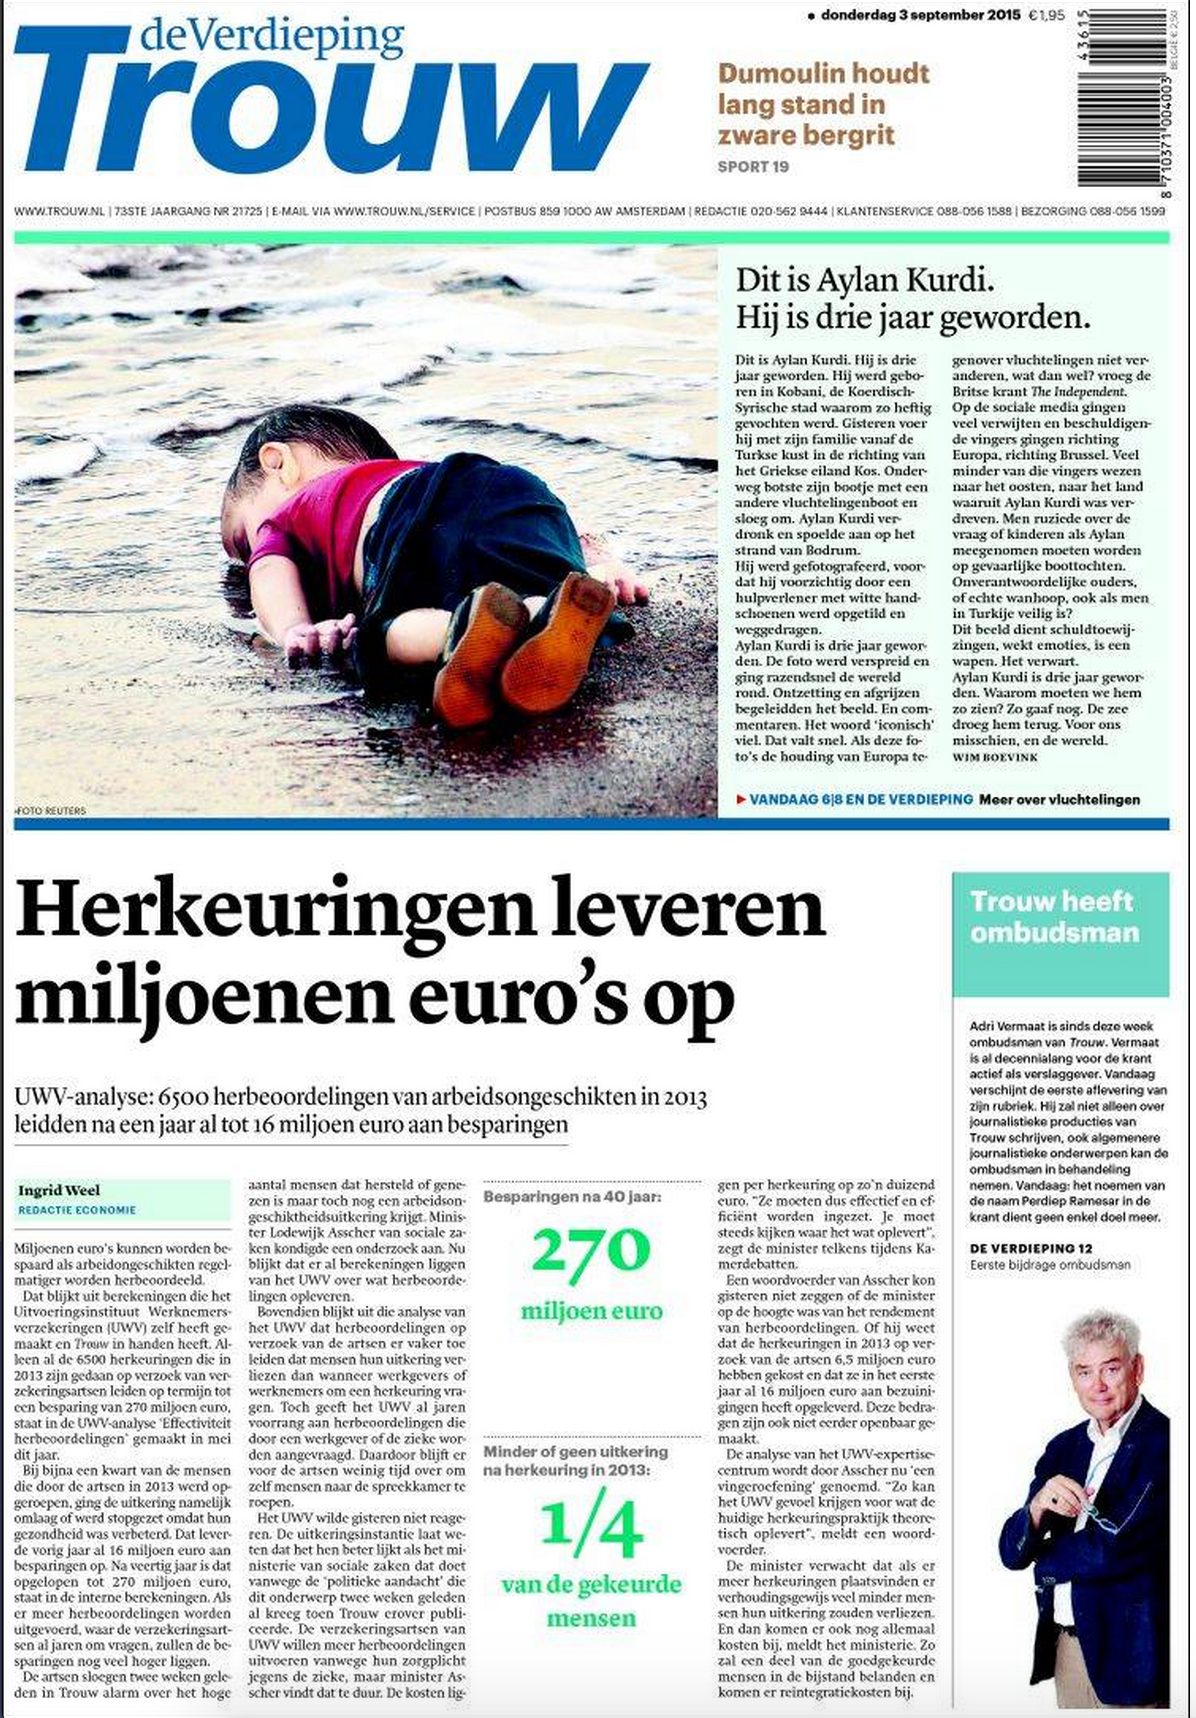 Drowned Migrant Boy Trouw front page